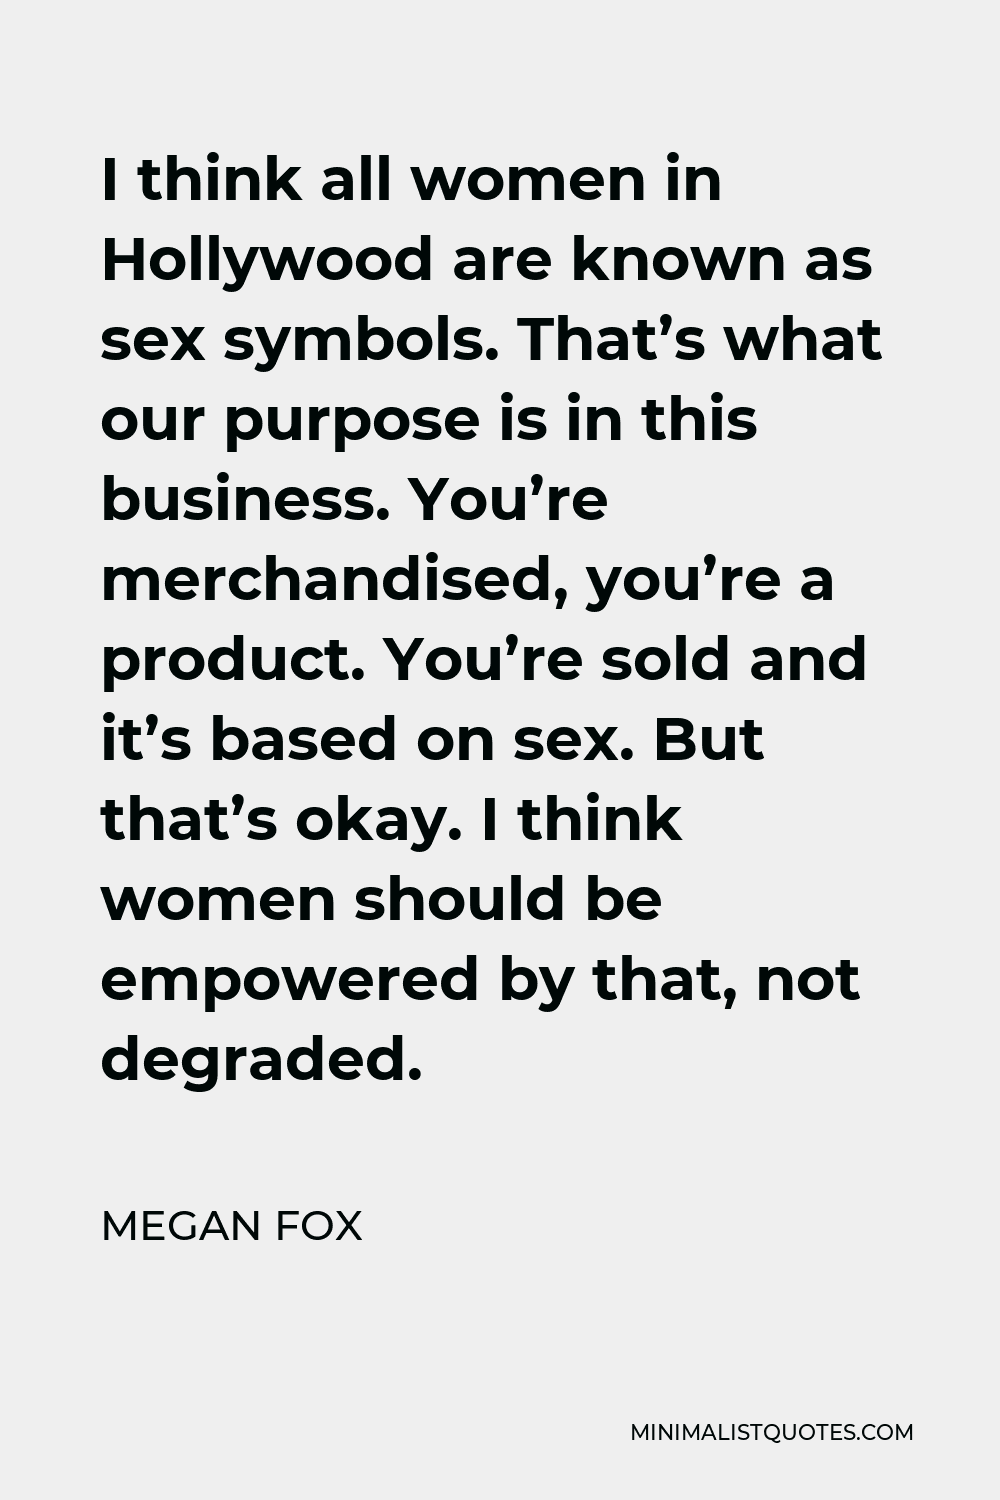 Megan Fox Quote - I think all women in Hollywood are known as sex symbols. That’s what our purpose is in this business. You’re merchandised, you’re a product. You’re sold and it’s based on sex. But that’s okay. I think women should be empowered by that, not degraded.